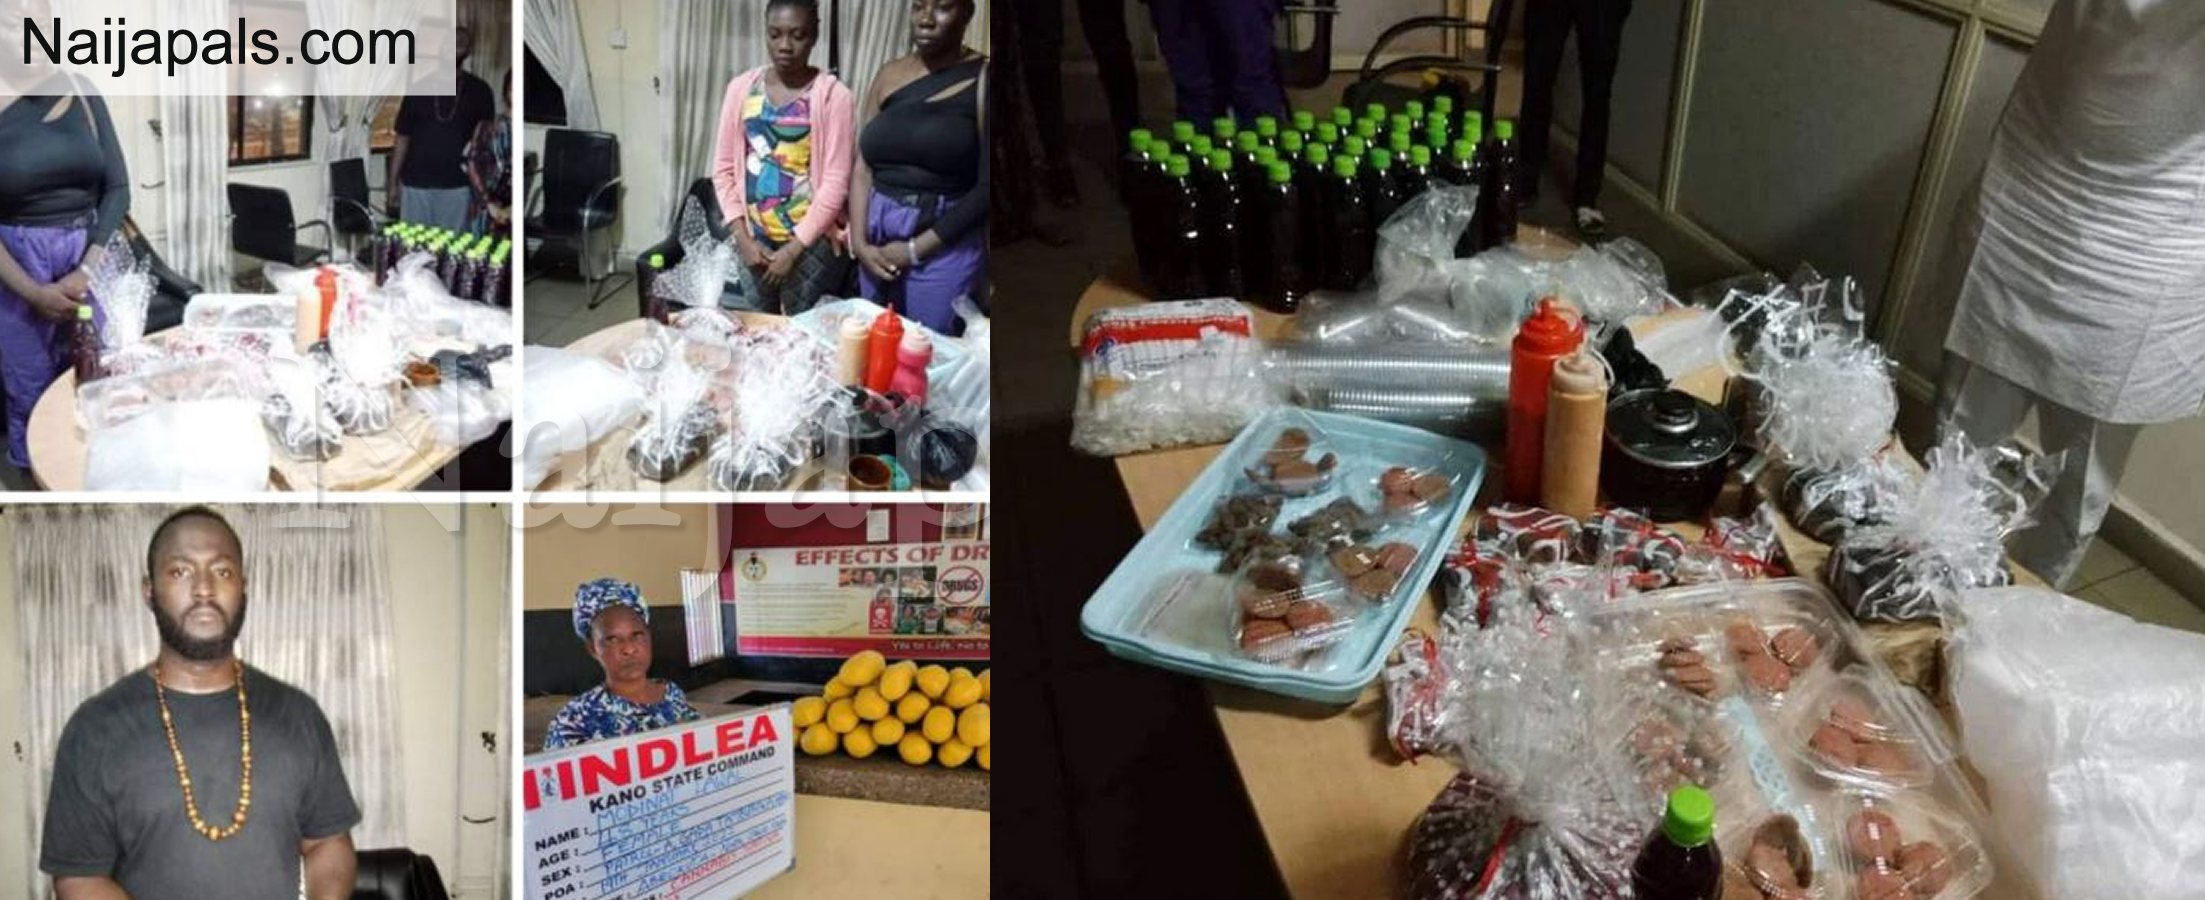 <img alt='.' class='lazyload' data-src='https://img.gistmania.com/emot/photo.png' /><b> 6 Persons Selling Drug Cookies, Noodles Arrested By NDLEA Following Raid In Abuja</b>